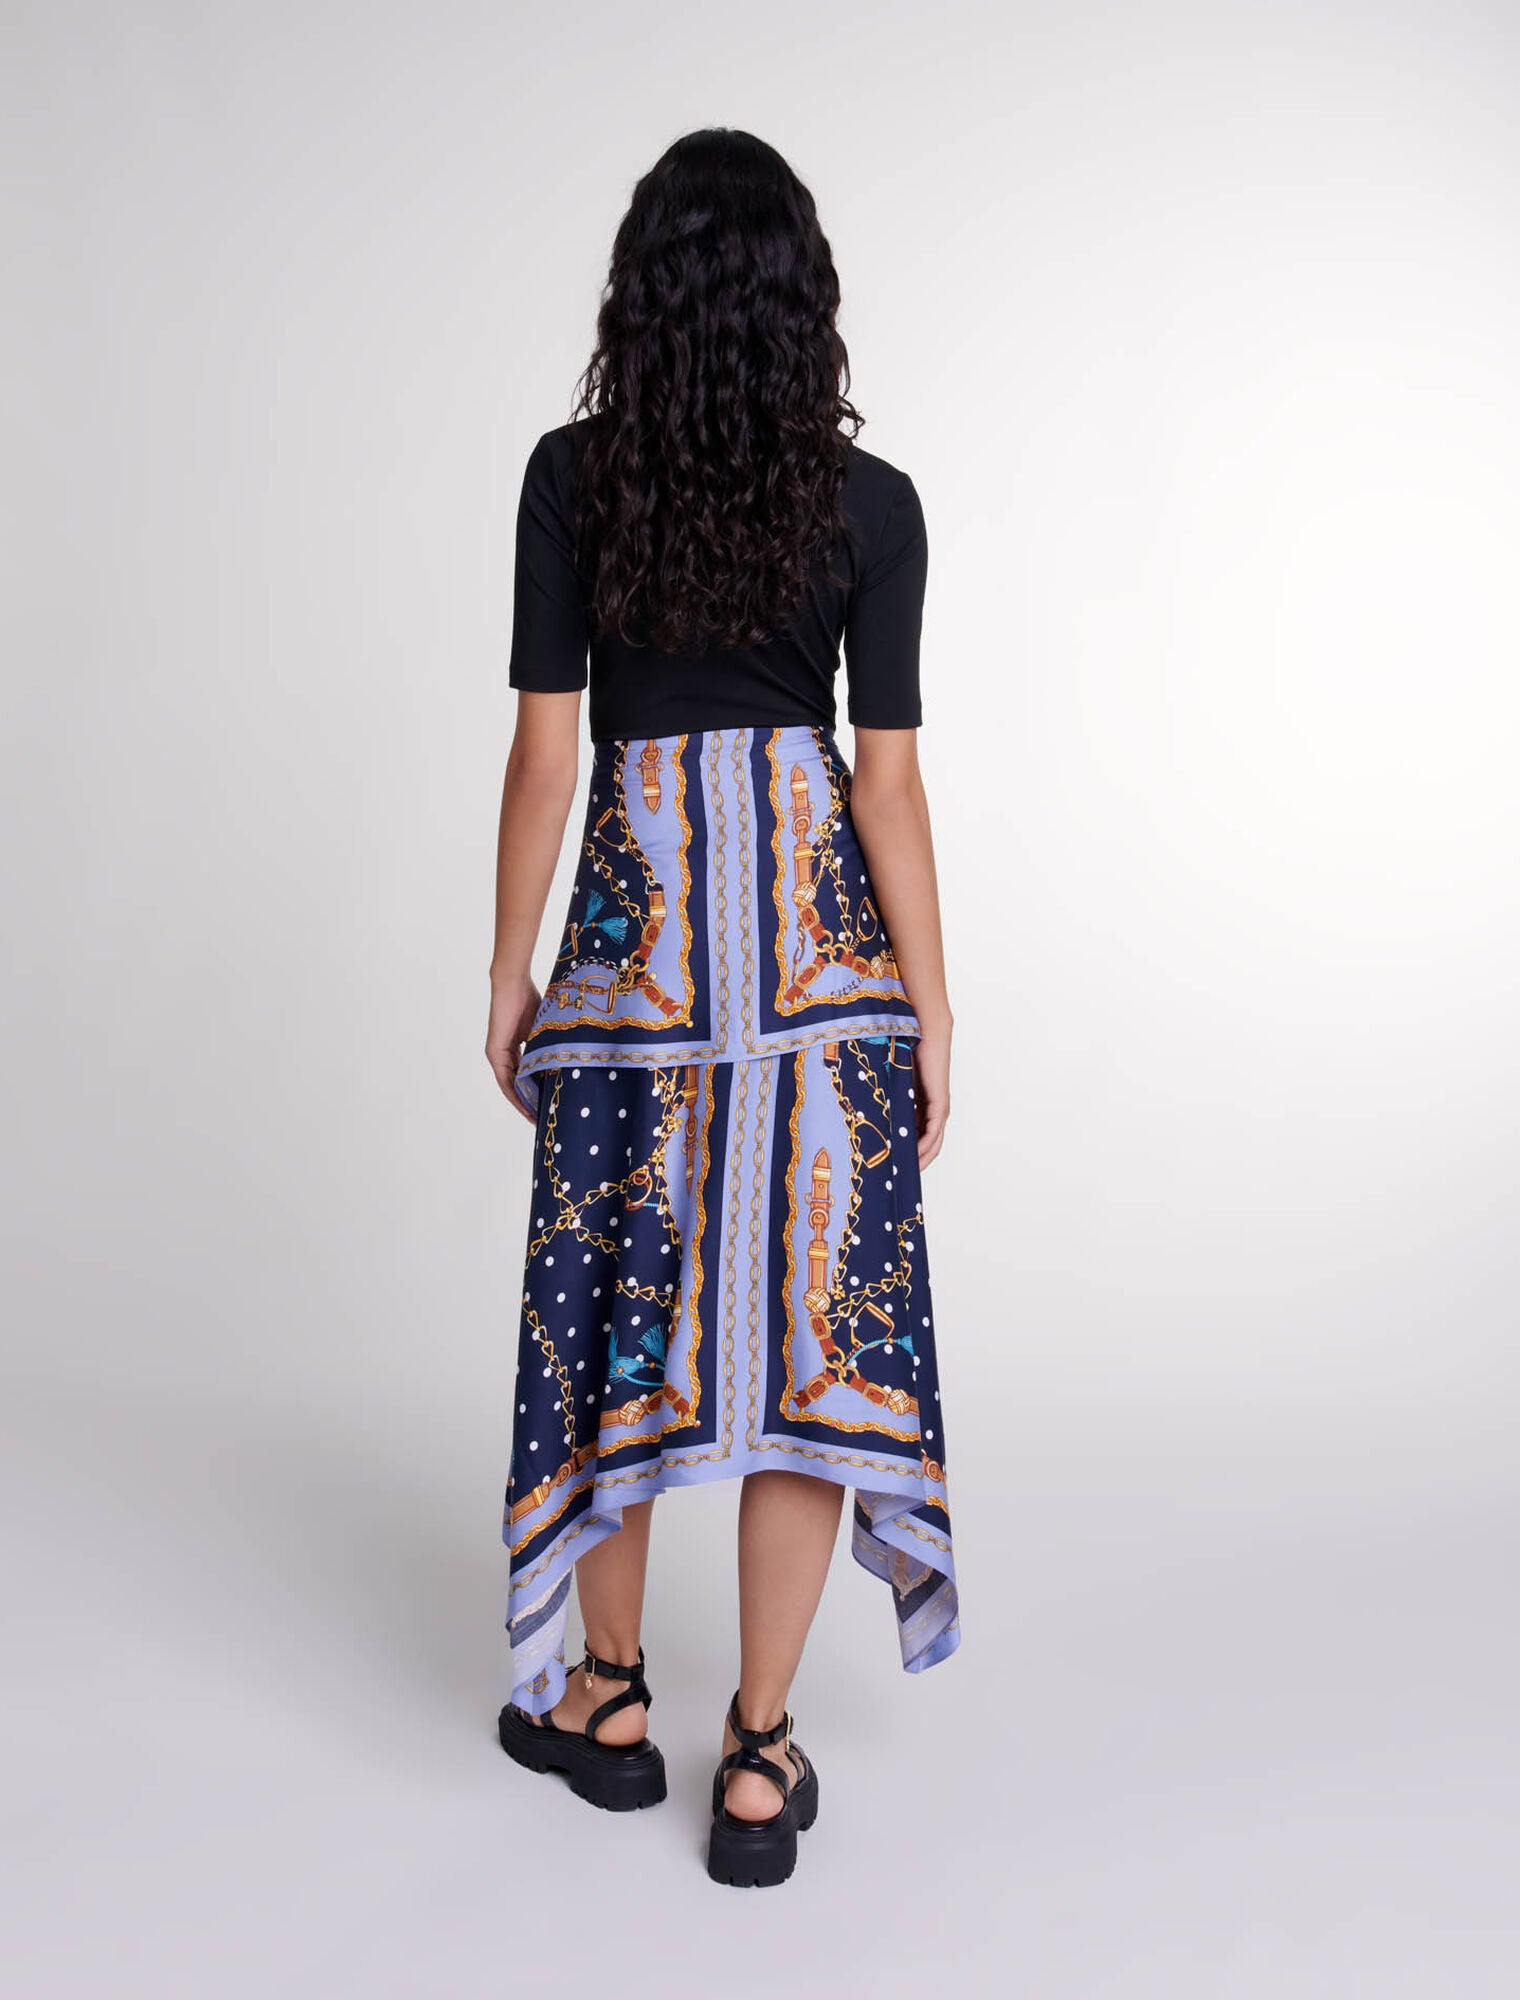 Chain Scarf Print Blue-Illusion effect patterned dress